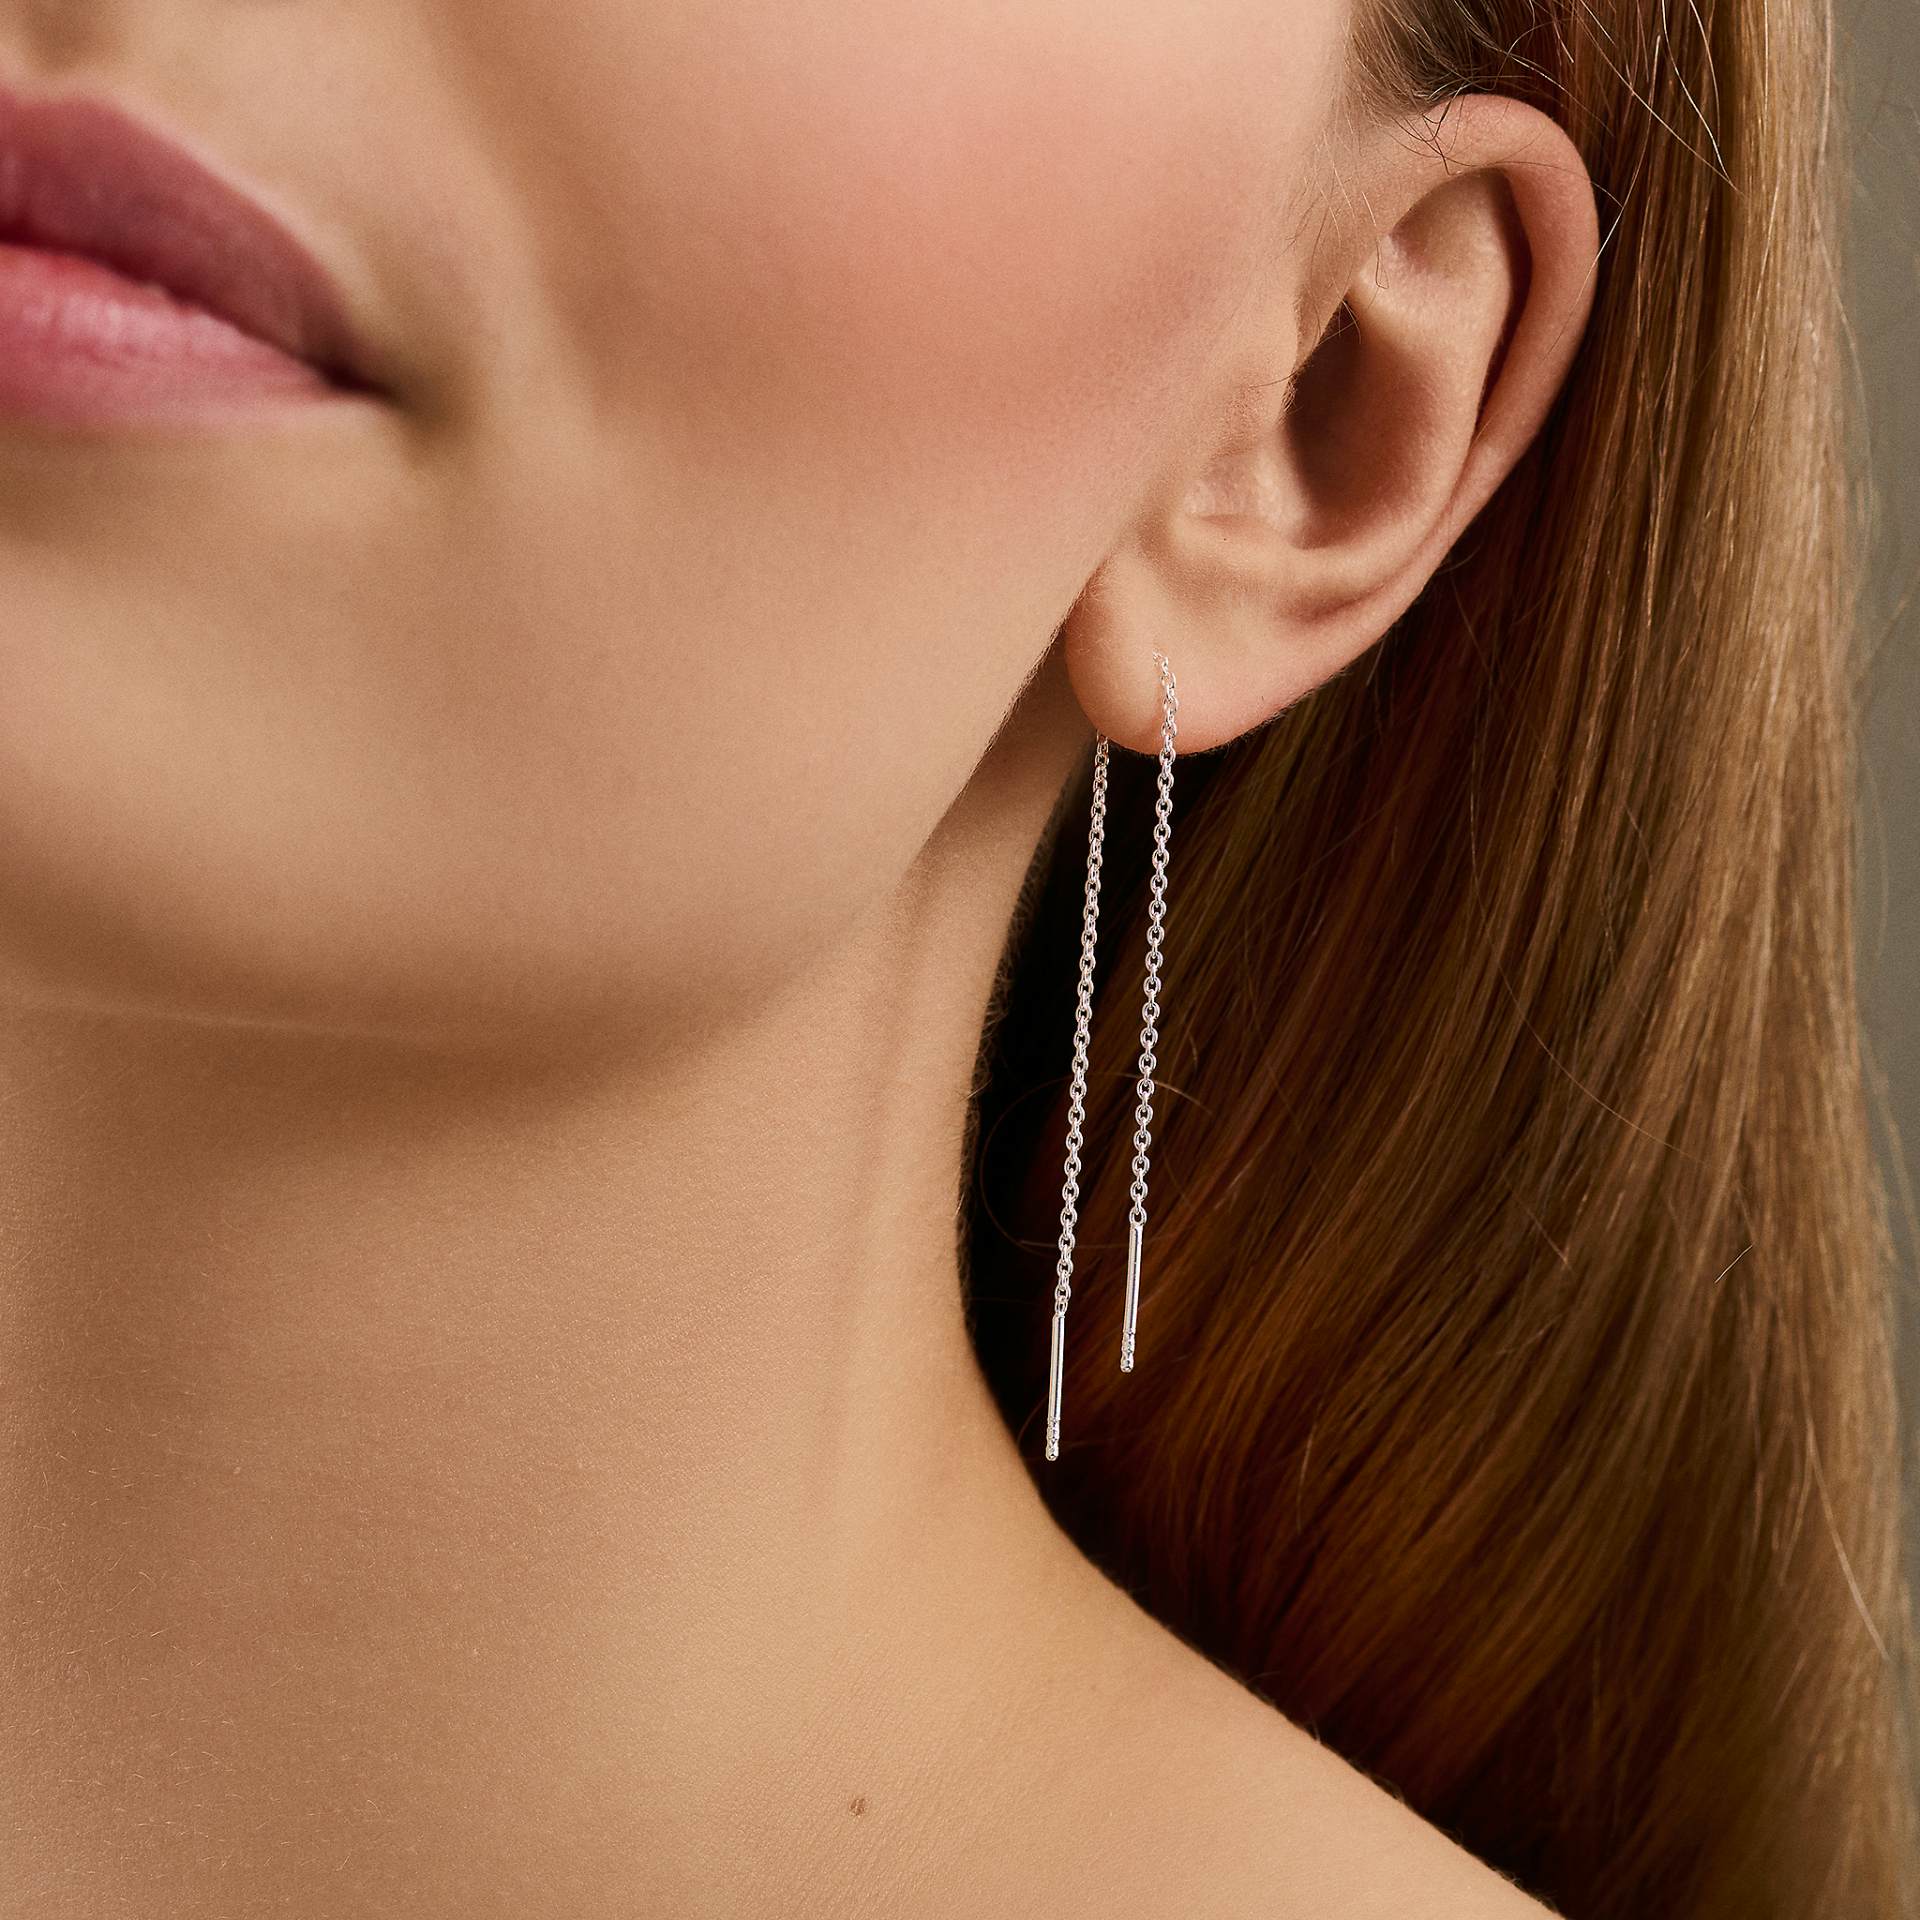 Plain Earchains von Pernille Corydon in Silber Sterling 925